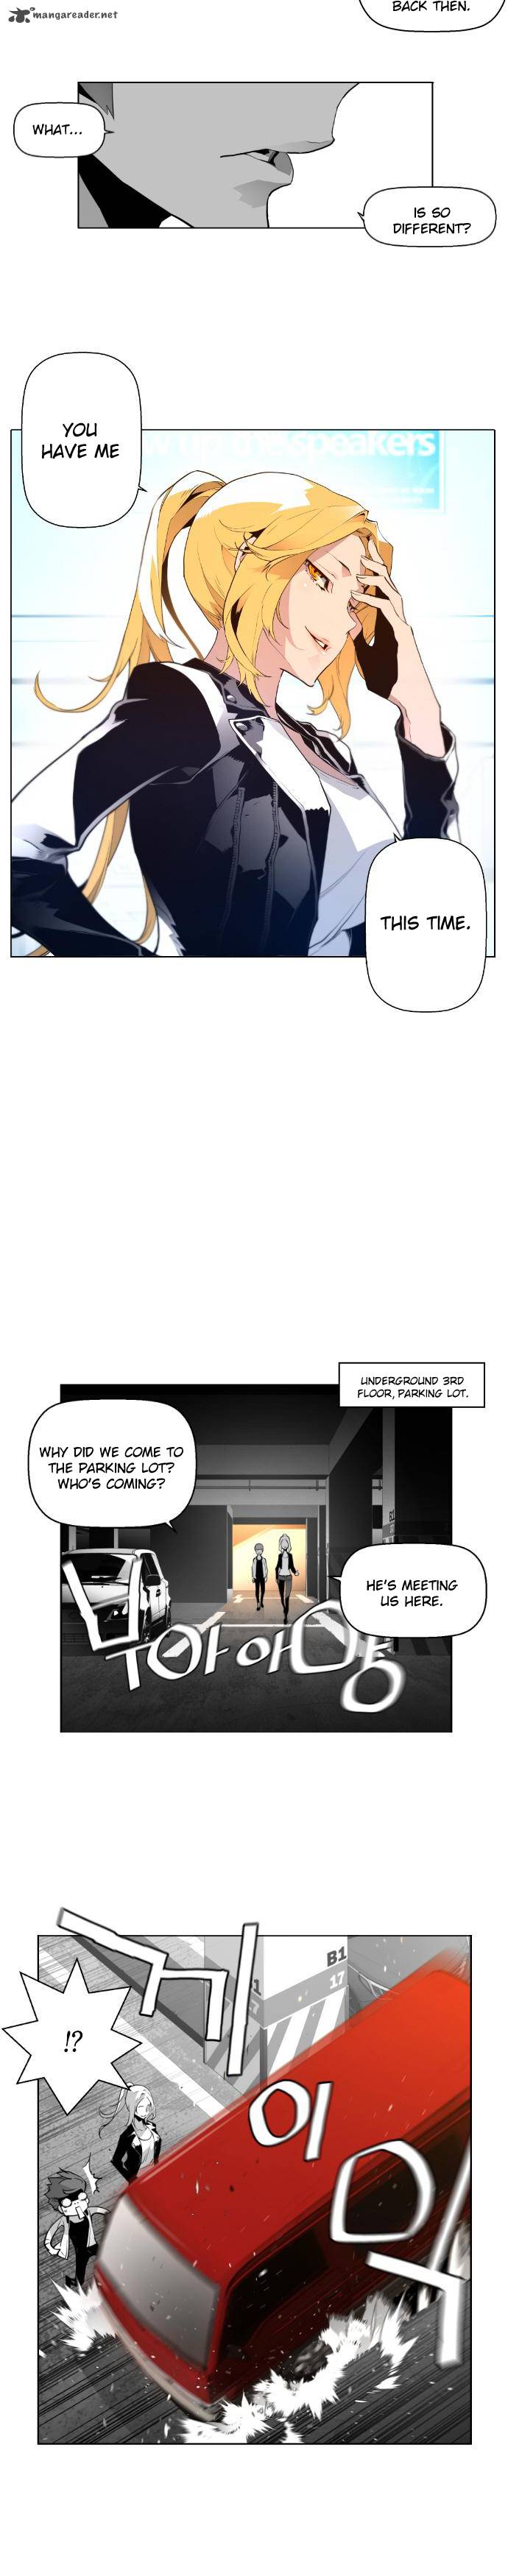 Terror Man Chapter 1 Page 24